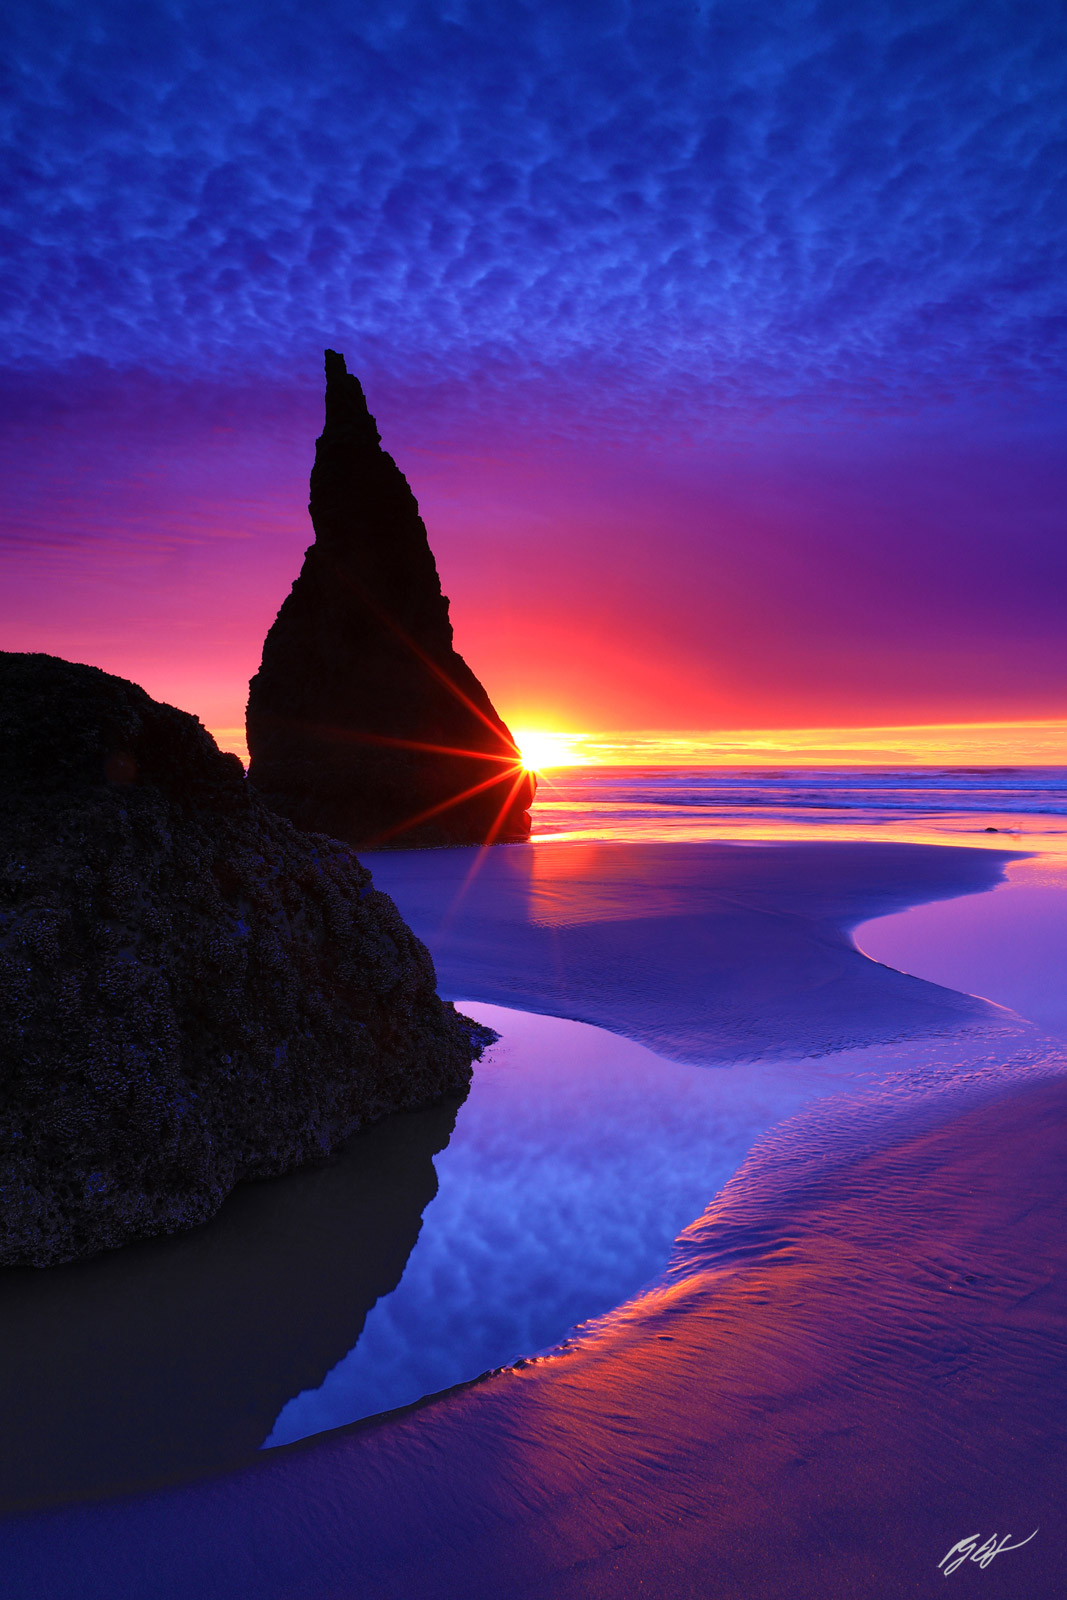 Sunset Sunstar Wizards Hat from Face Rock Beach in Bandon, Oregon